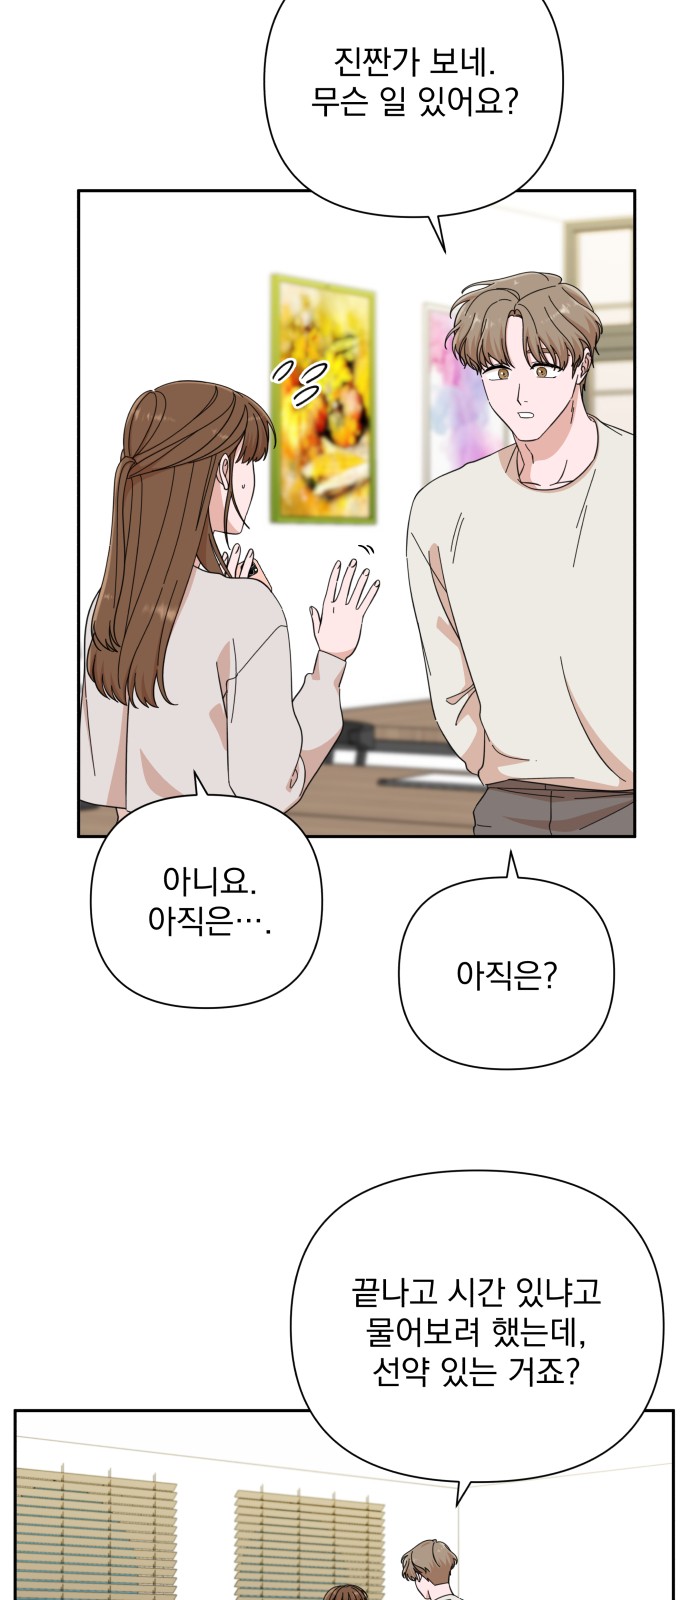 The Man With Pretty Lips - Chapter 48 - Page 6